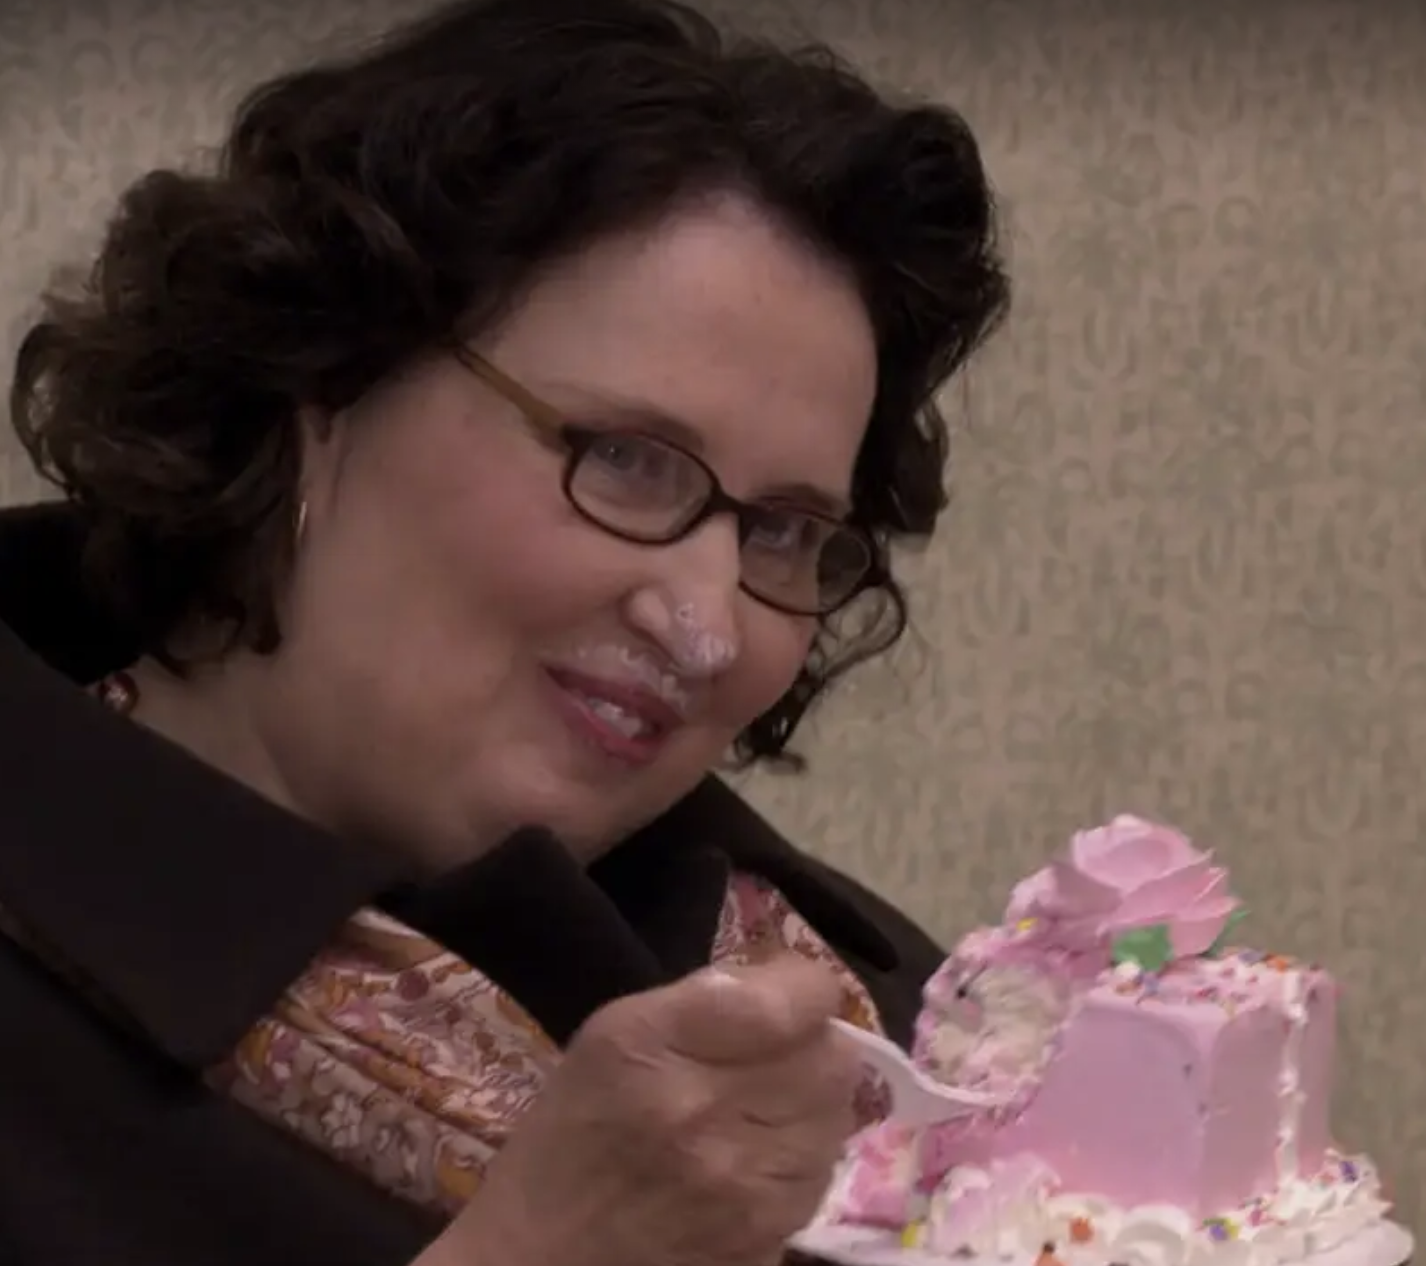 a woman wearing glasses eats cake and looks up, slightly smiling